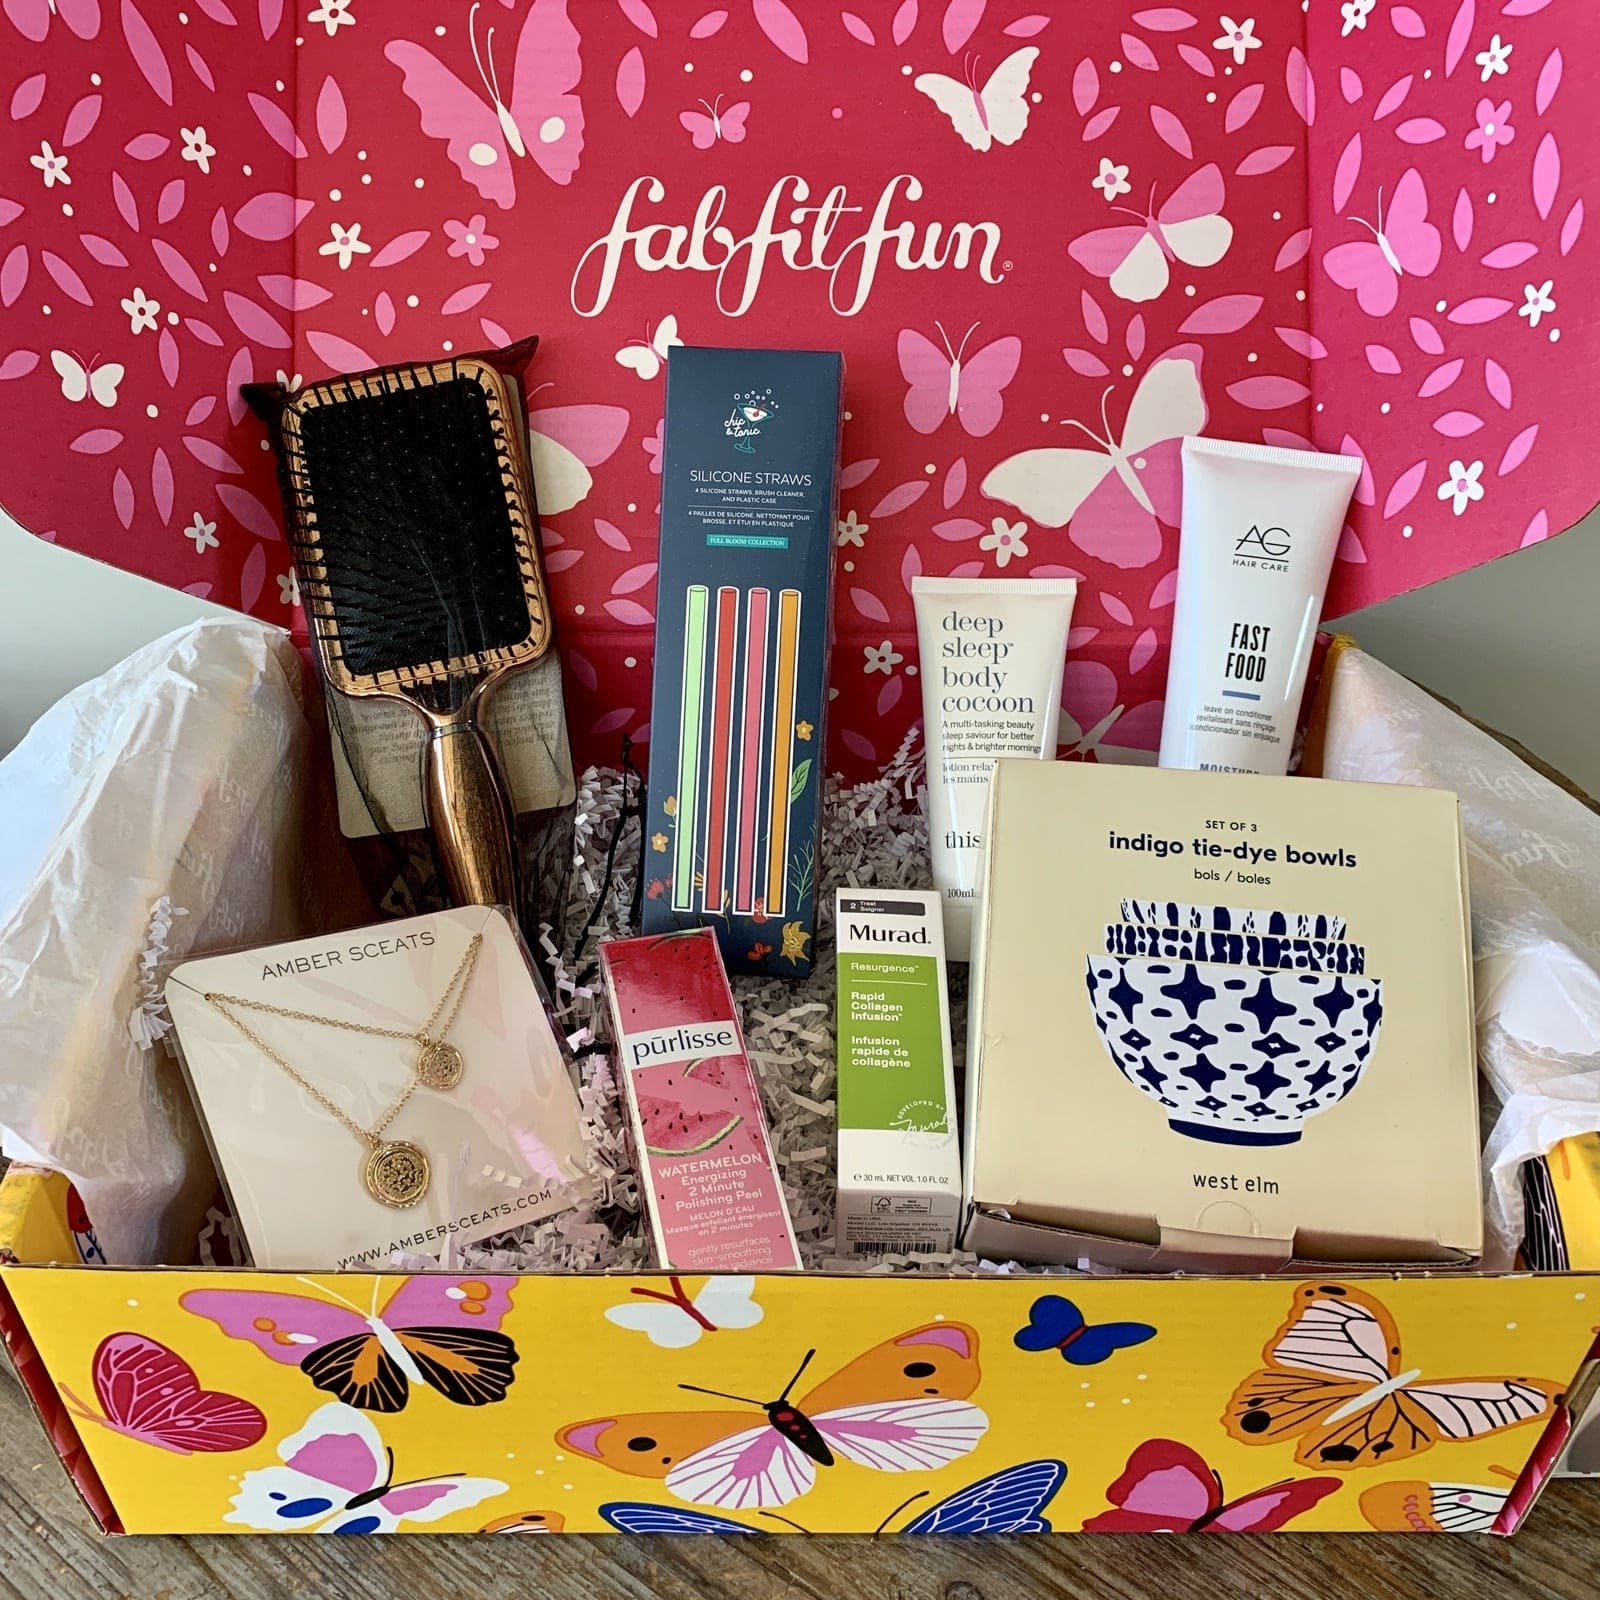 List Of Products In Spring 2022 Fabfitfun Box Book List 2022